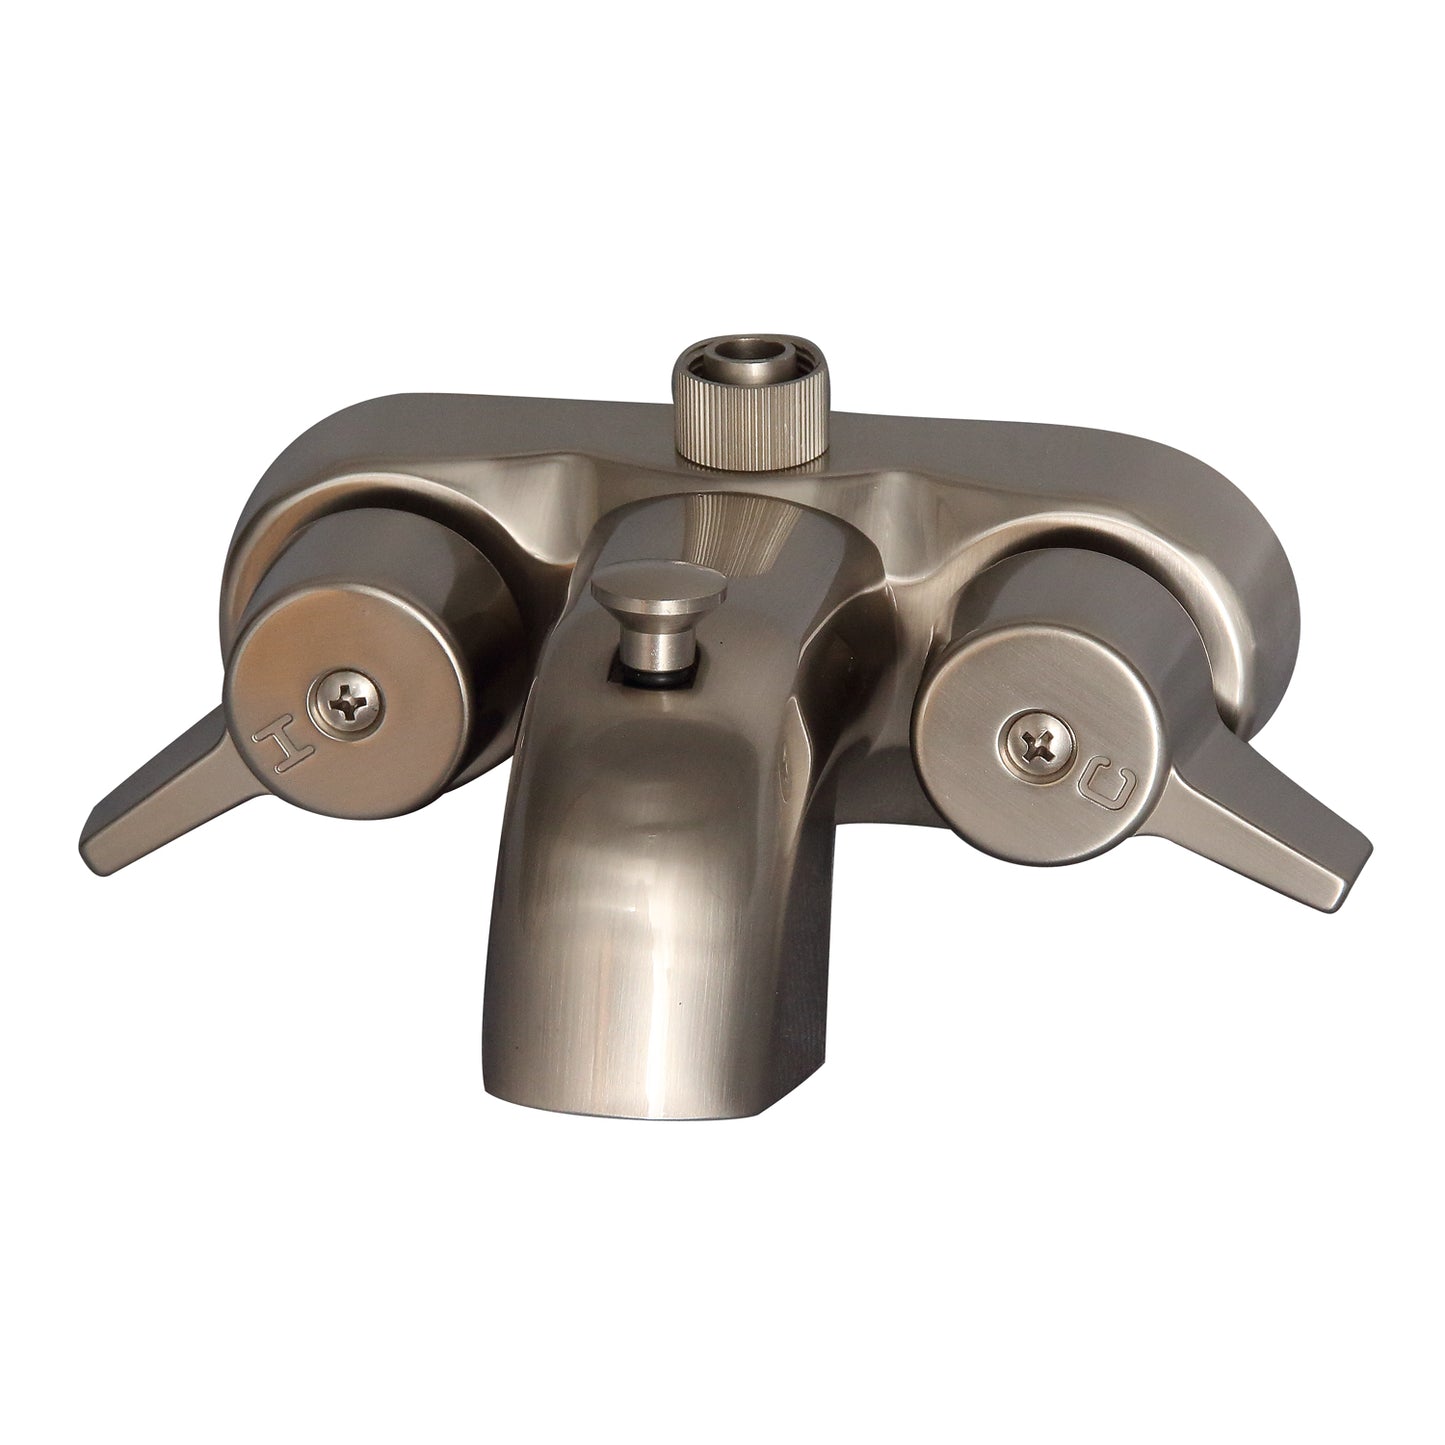 Tub Wall Mount Diverter Bathcock in Brushed Nickel